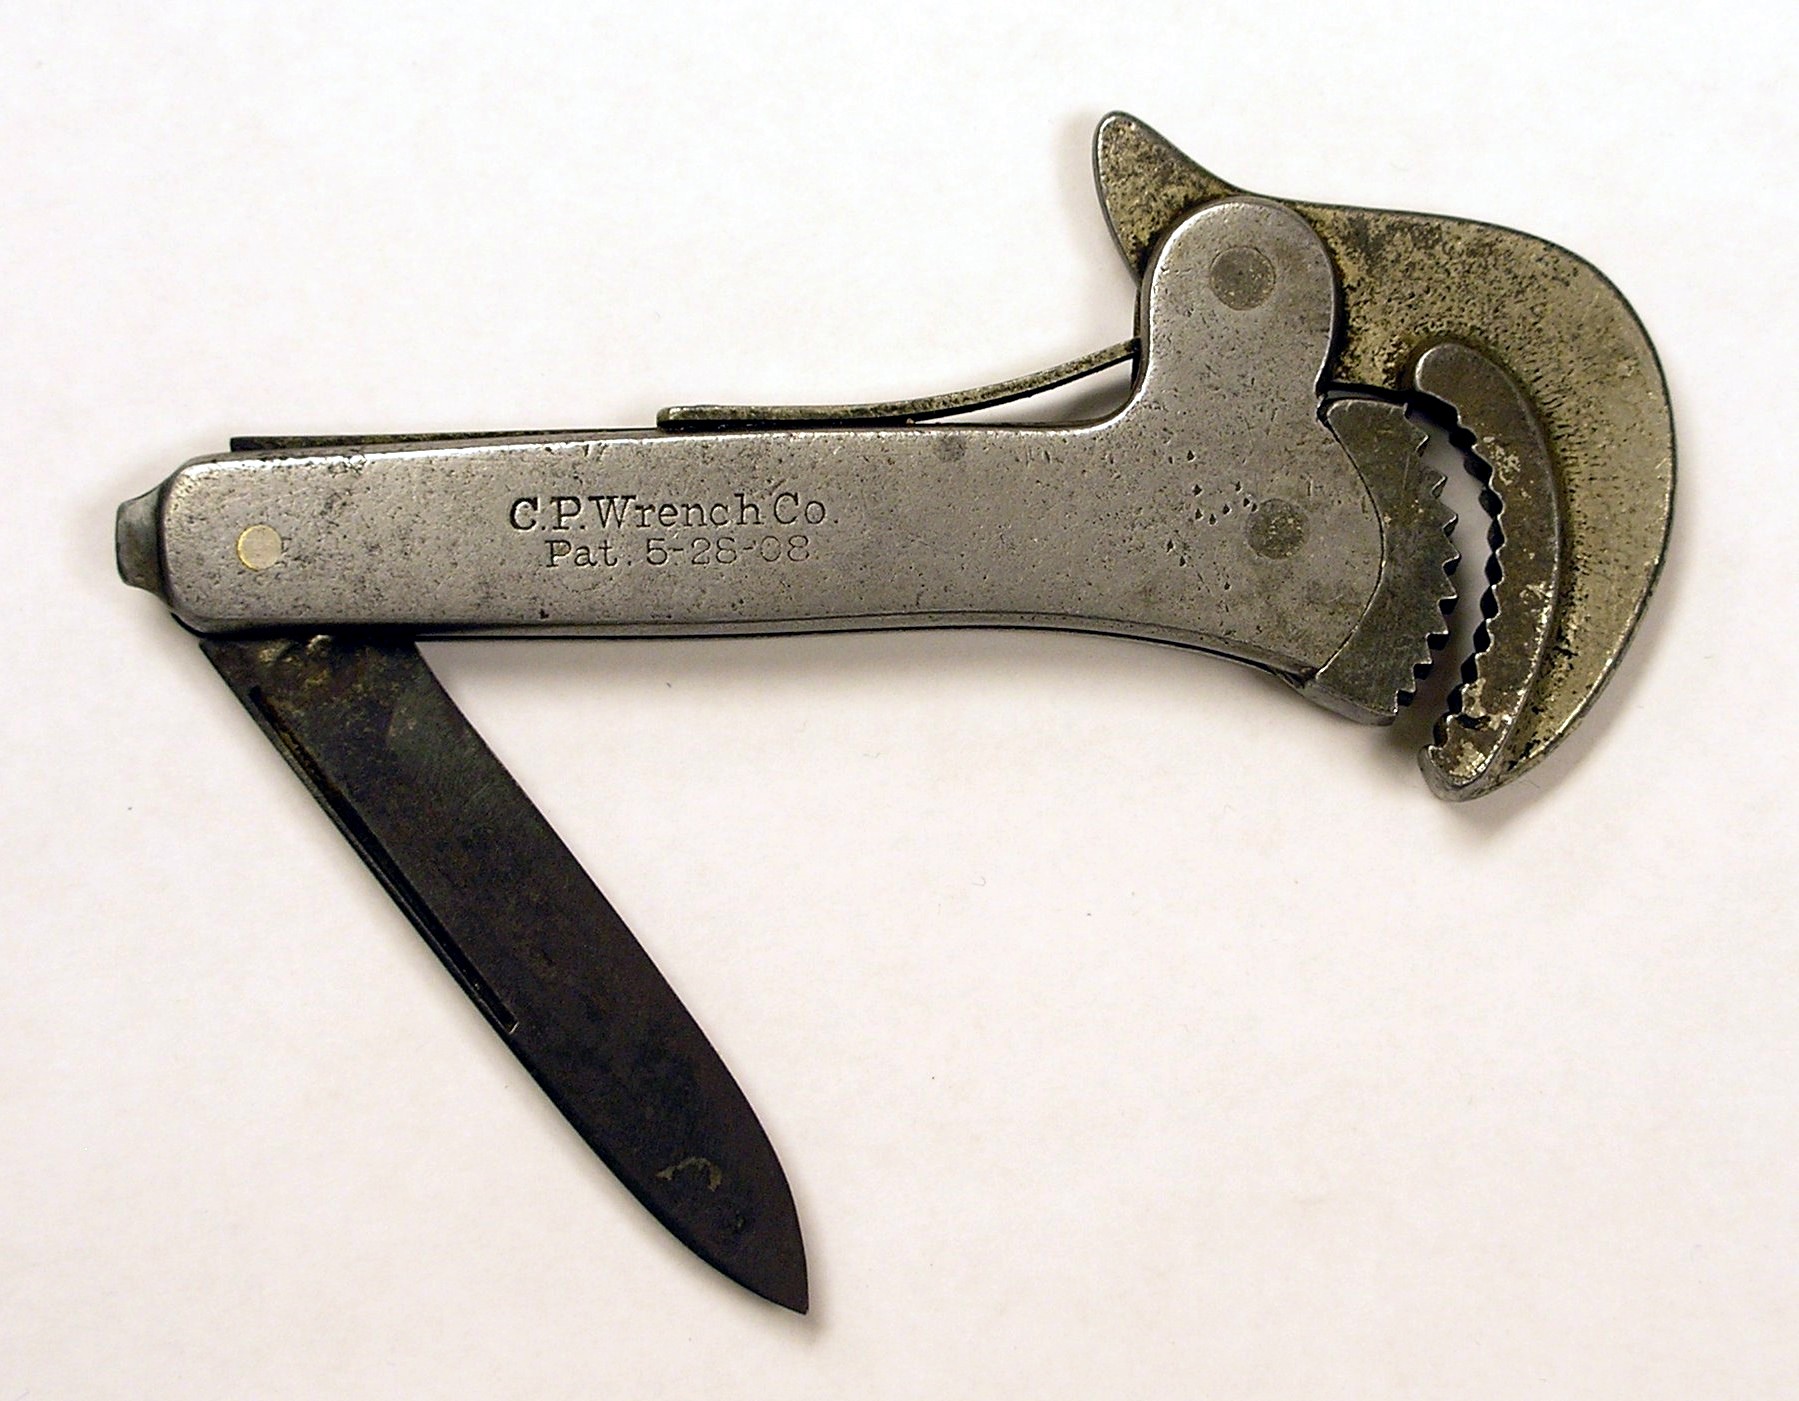 C.P. Wrench Knife